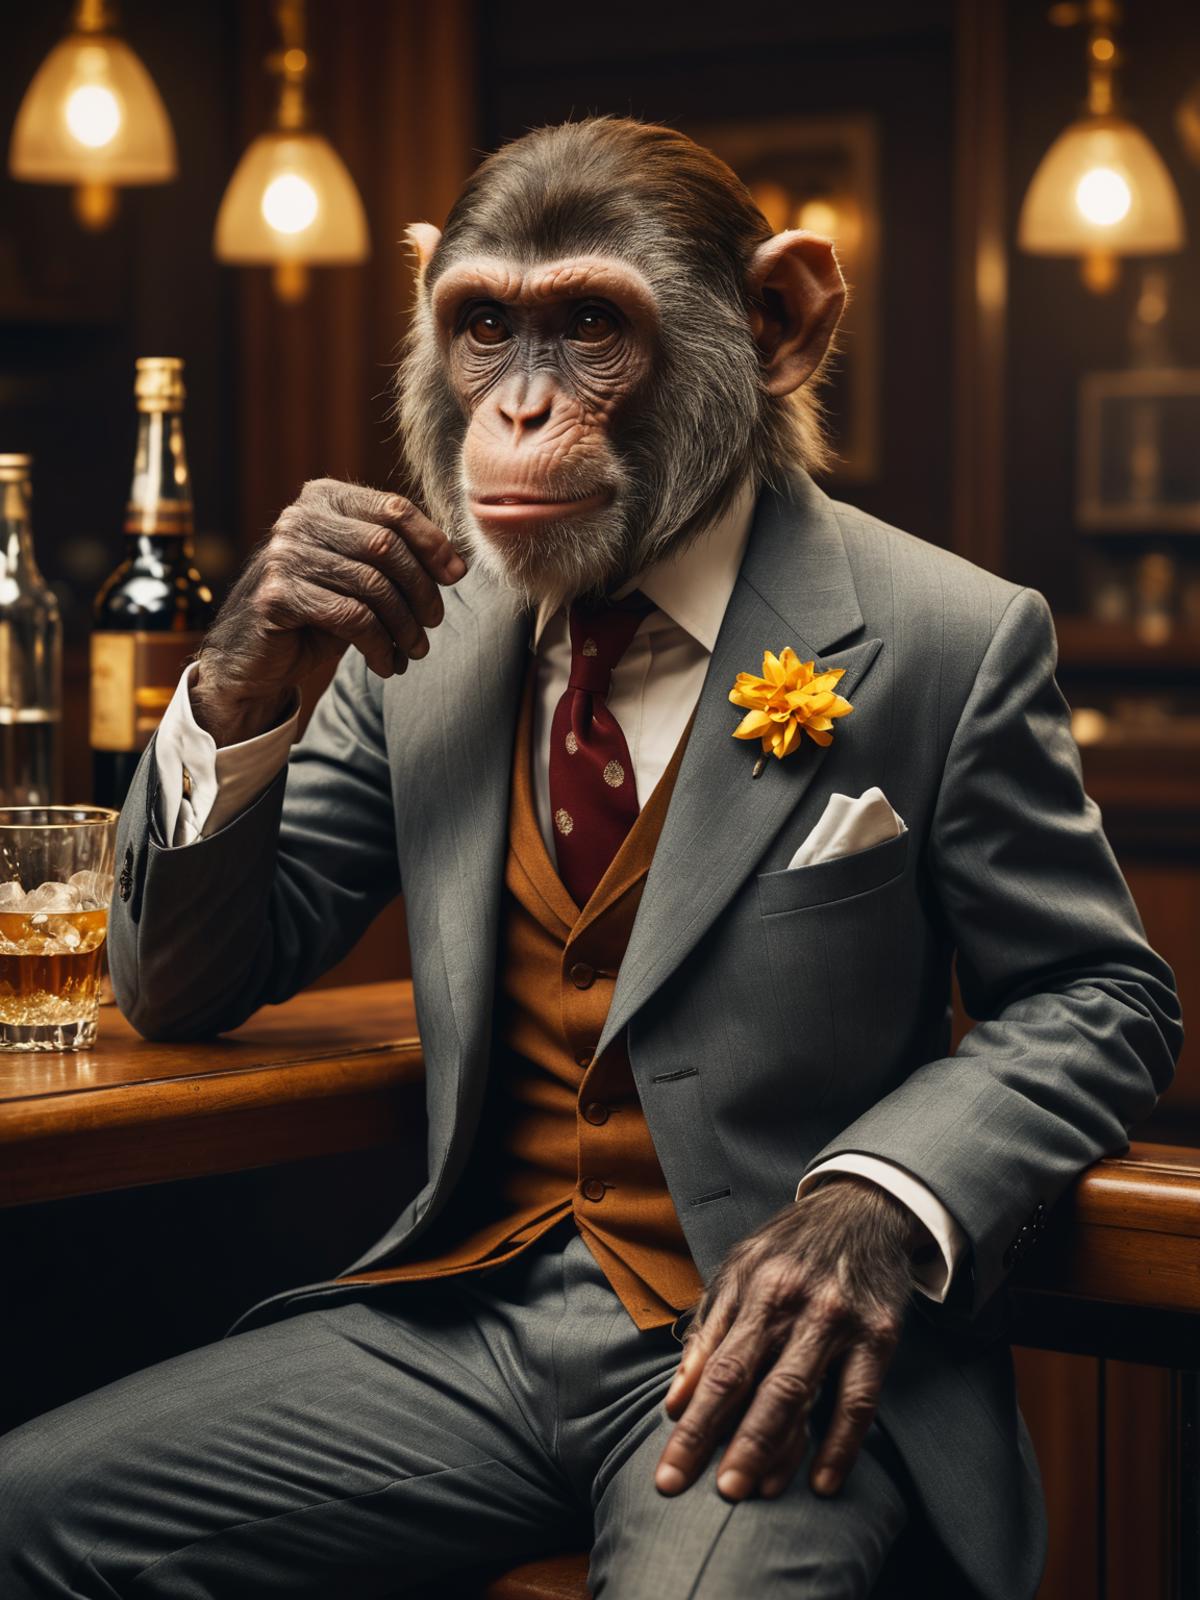 A man in a suit sitting at a bar with a monkey.